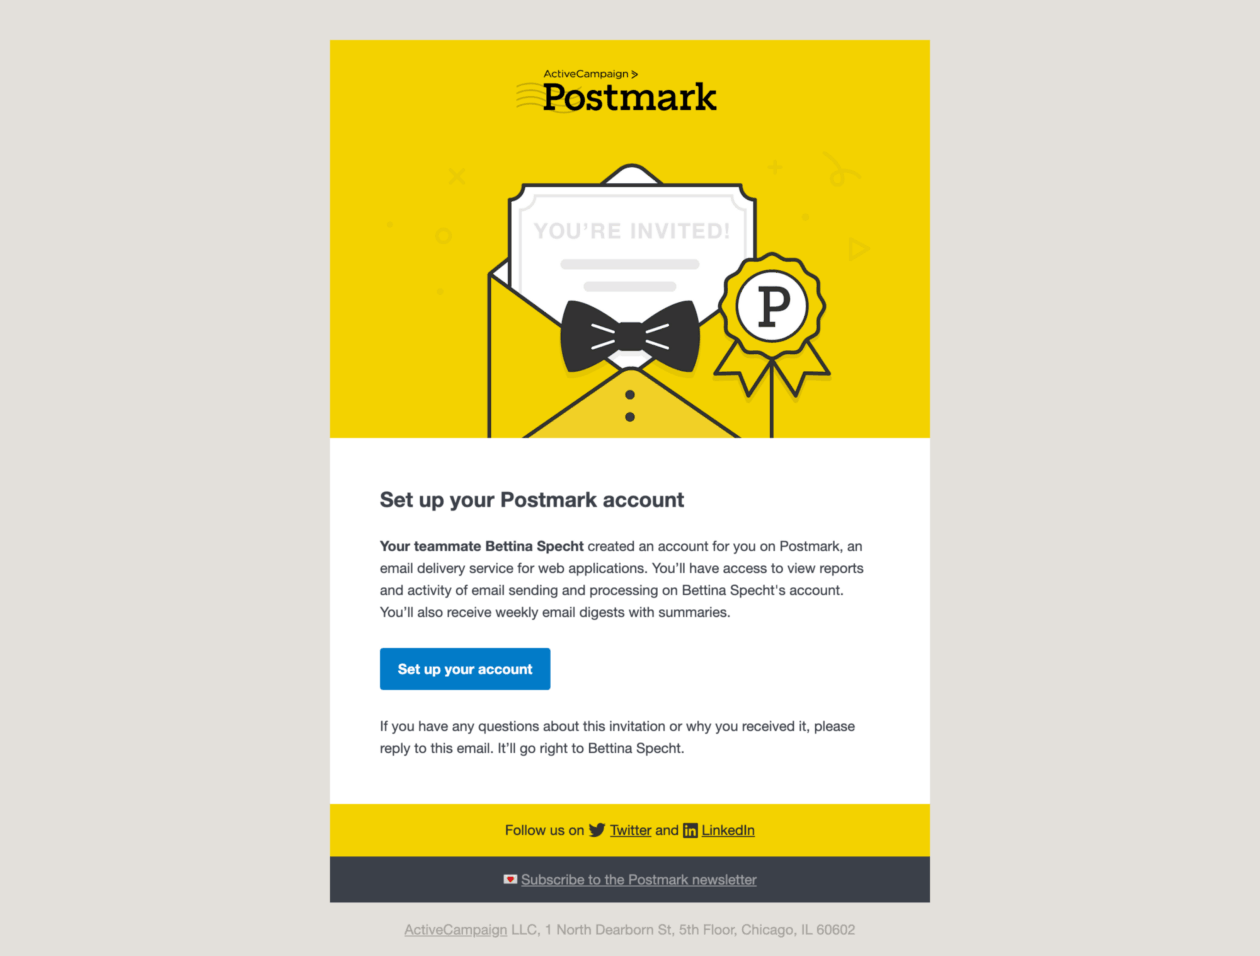 An example of transactional email: a Postmark email inviting teammates to the account